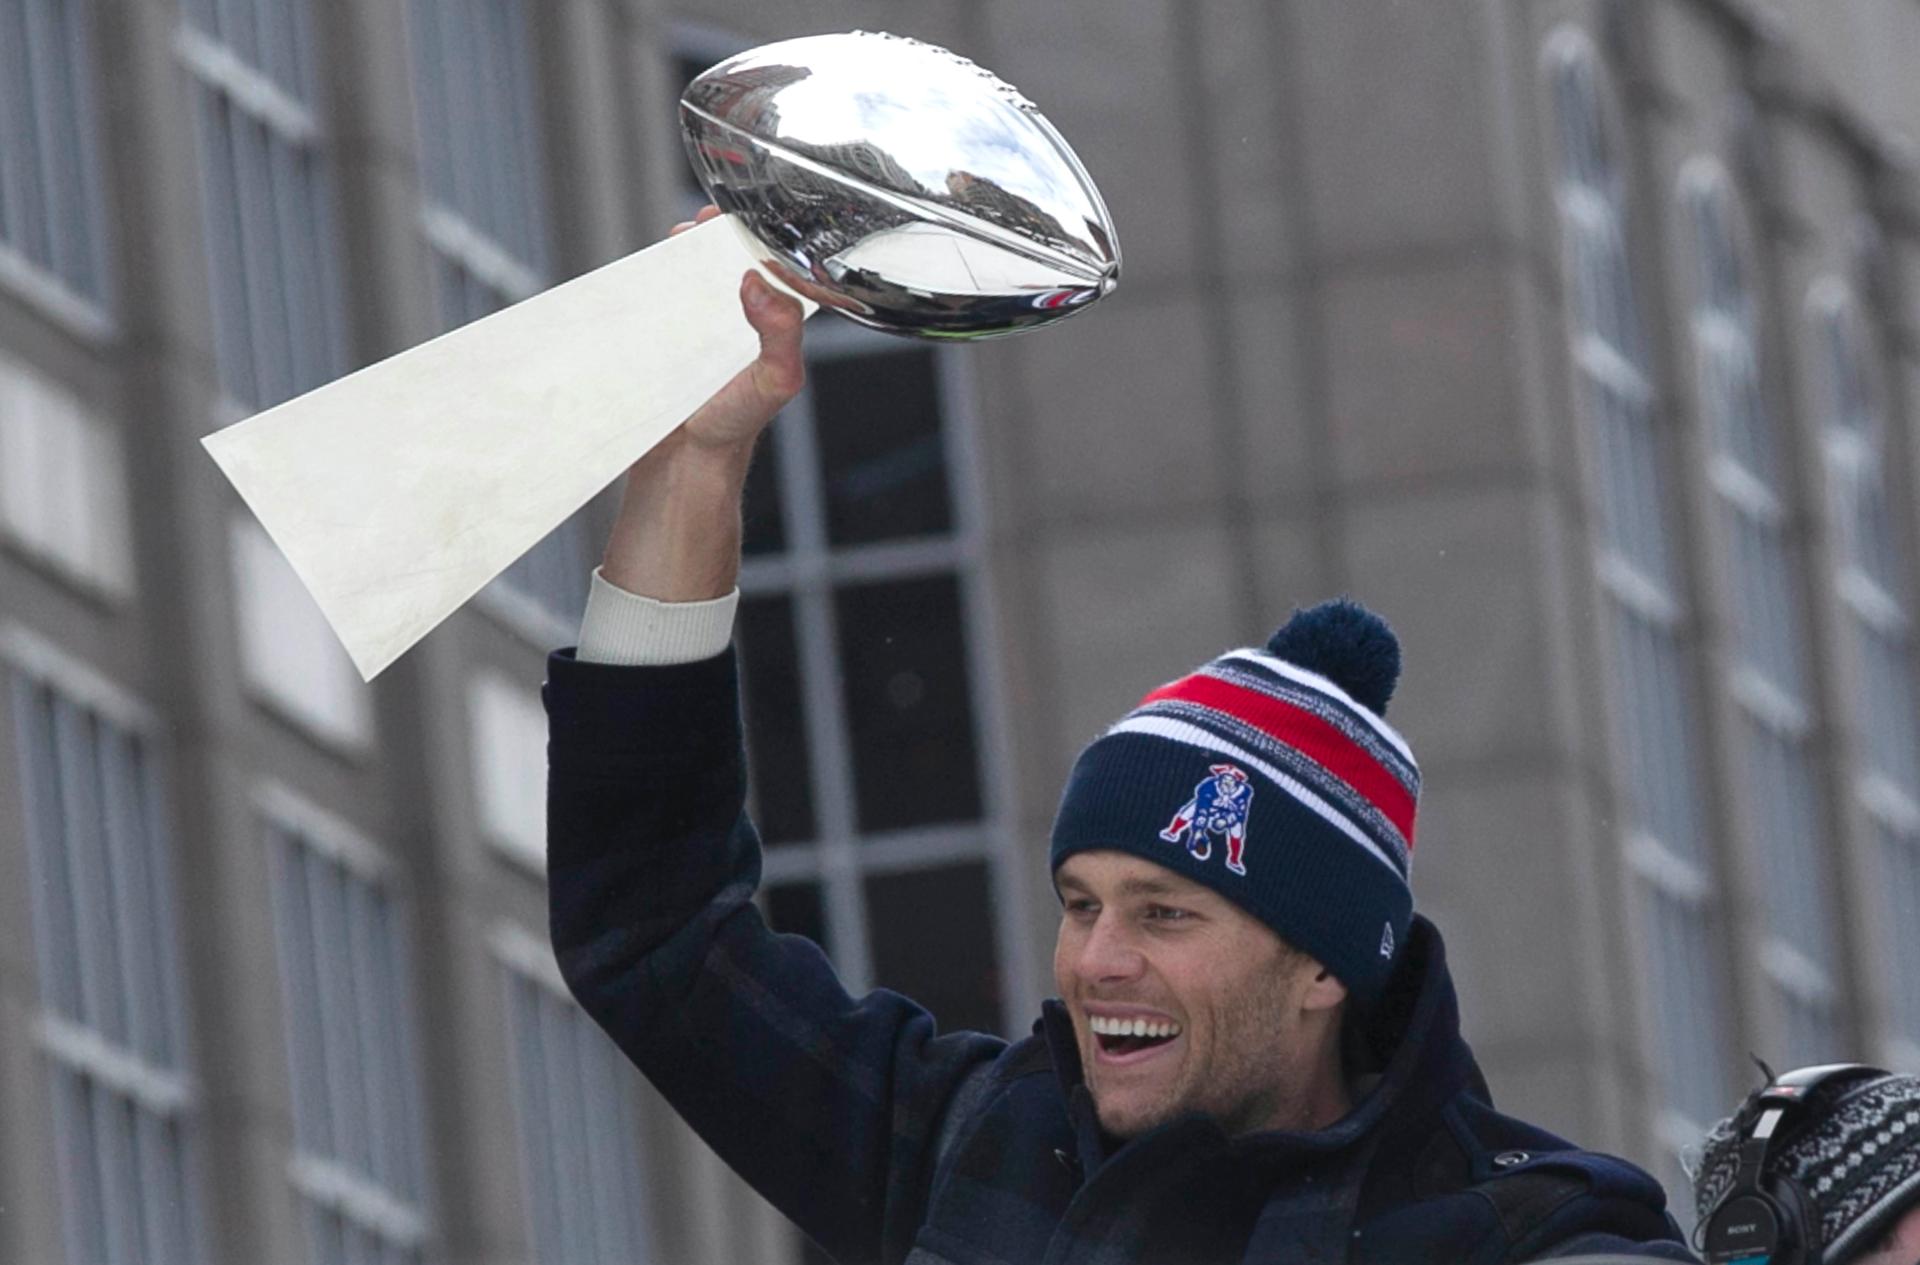 New England Patriots quarterback and Super Bowl MVP Tom Brady, holds the Vince Lombardi trophy during the Patriots' Super Bowl XLIX victory parade in Boston on February 4, 2015.